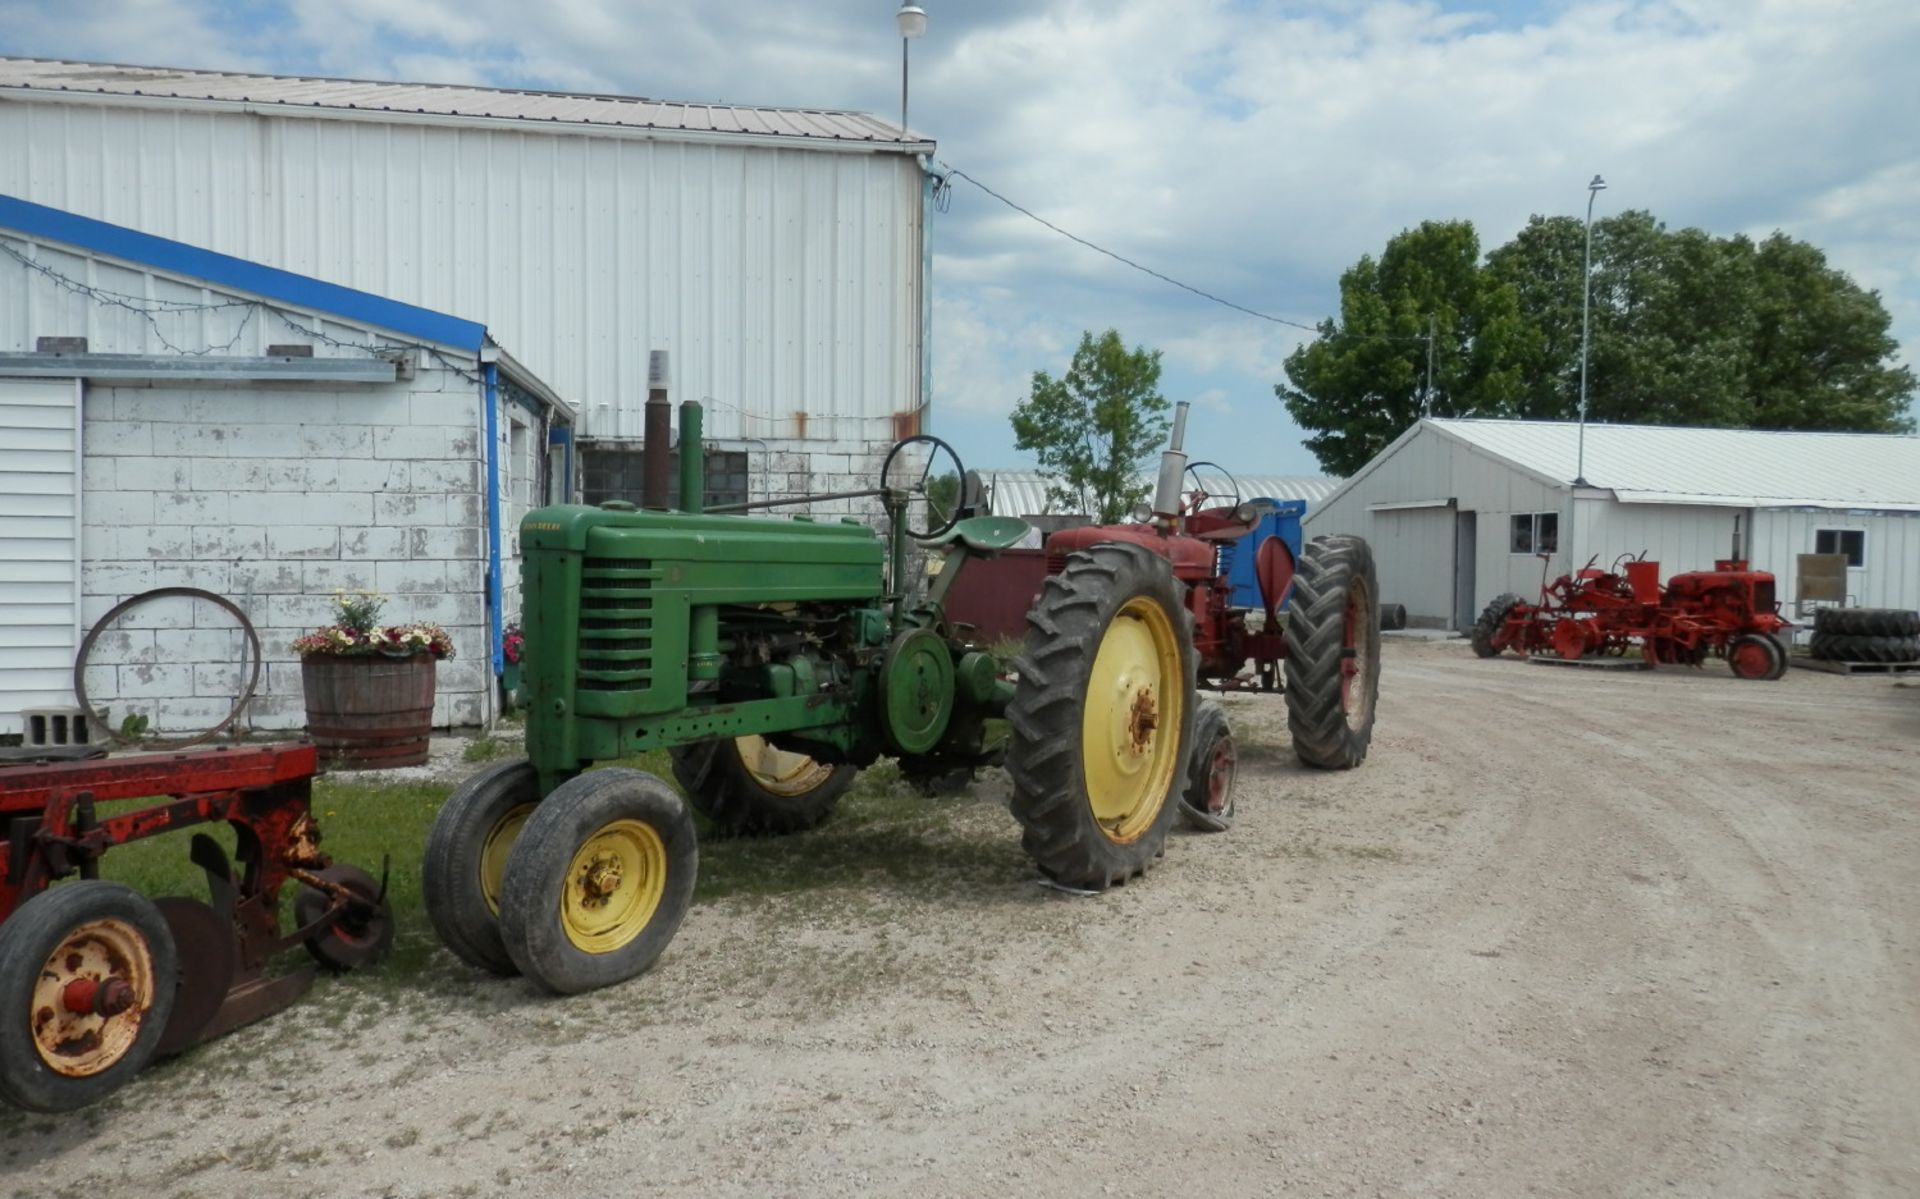 International, Oliver, White, Case, Minneapolis Moline, and More Tractors - Image 5 of 12